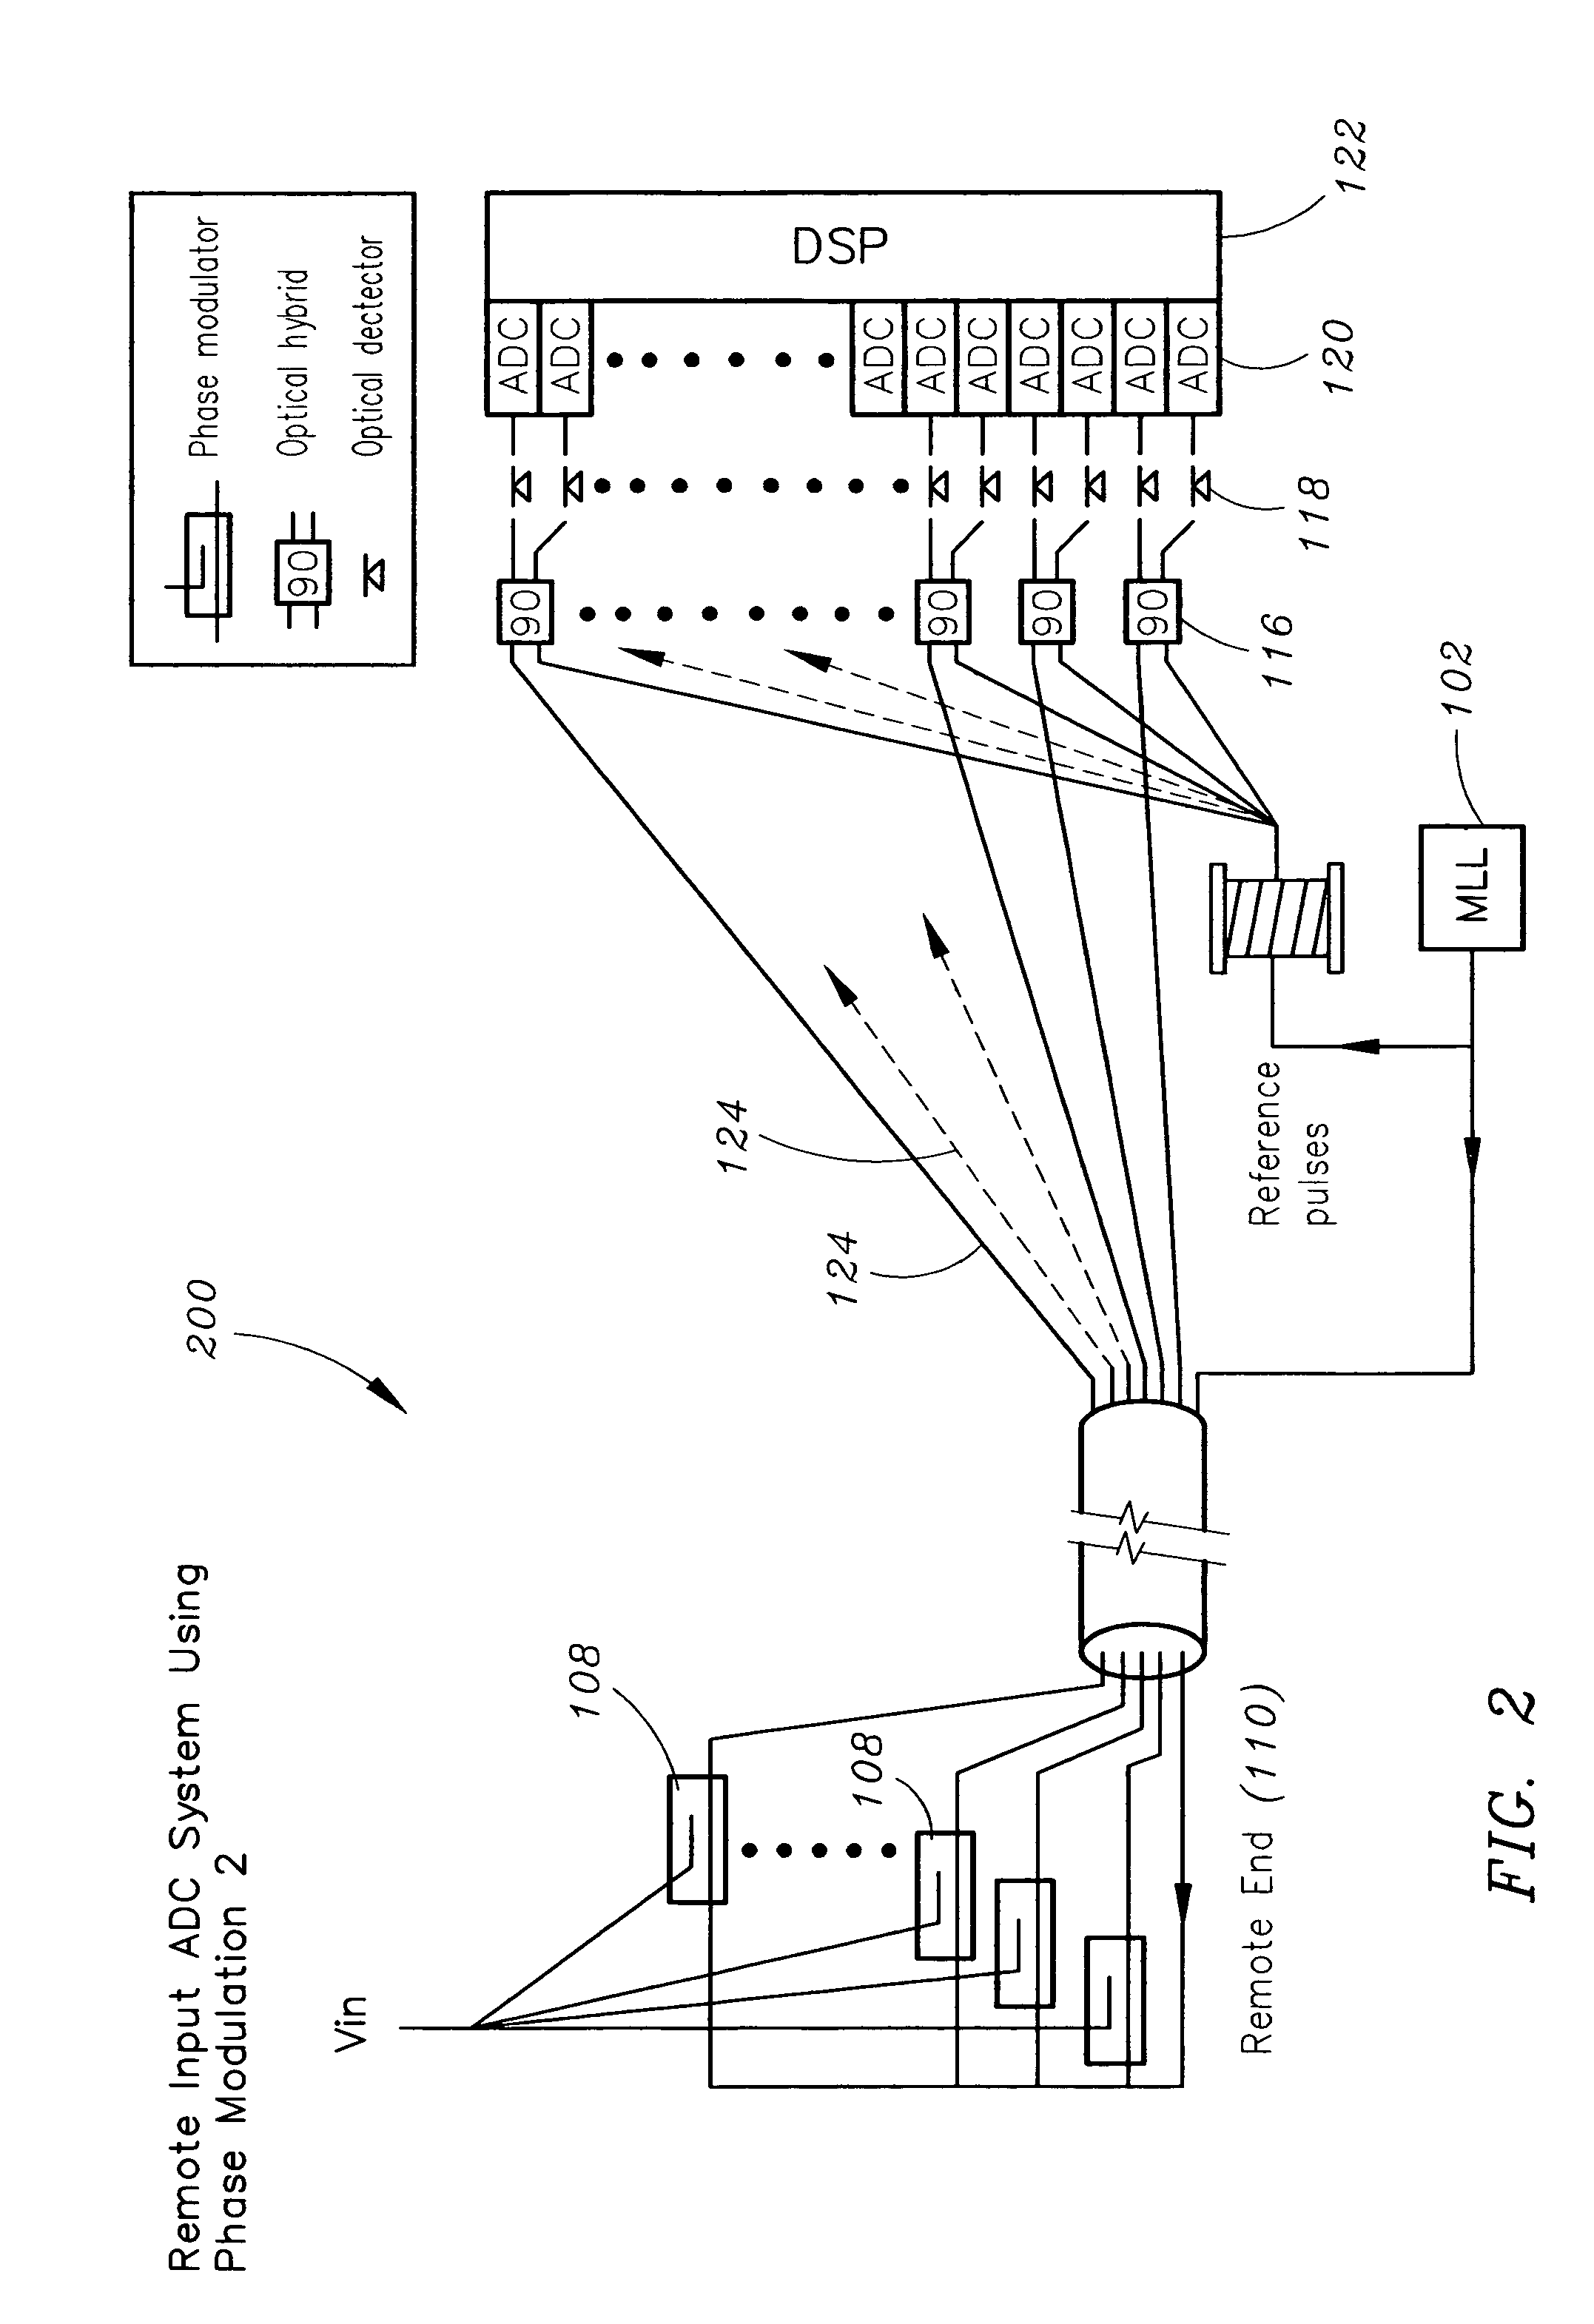 System and method for remoting a photonic analog-to-digital converter